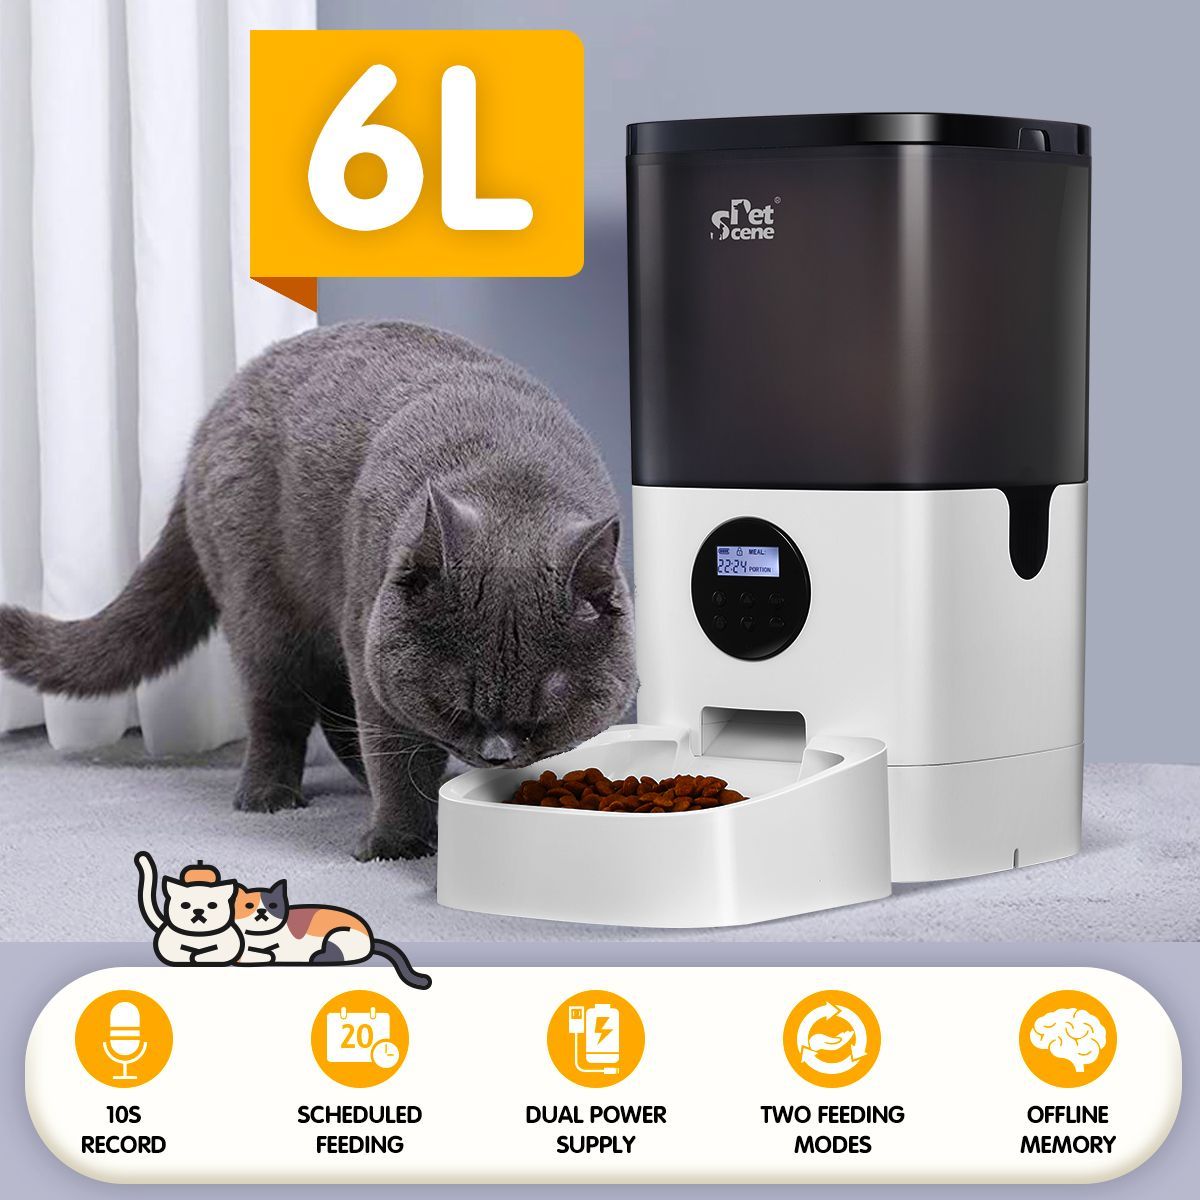 6L Automatic Pet Feeder Dog Cat Feeder Food Dispenser with LCD Screen